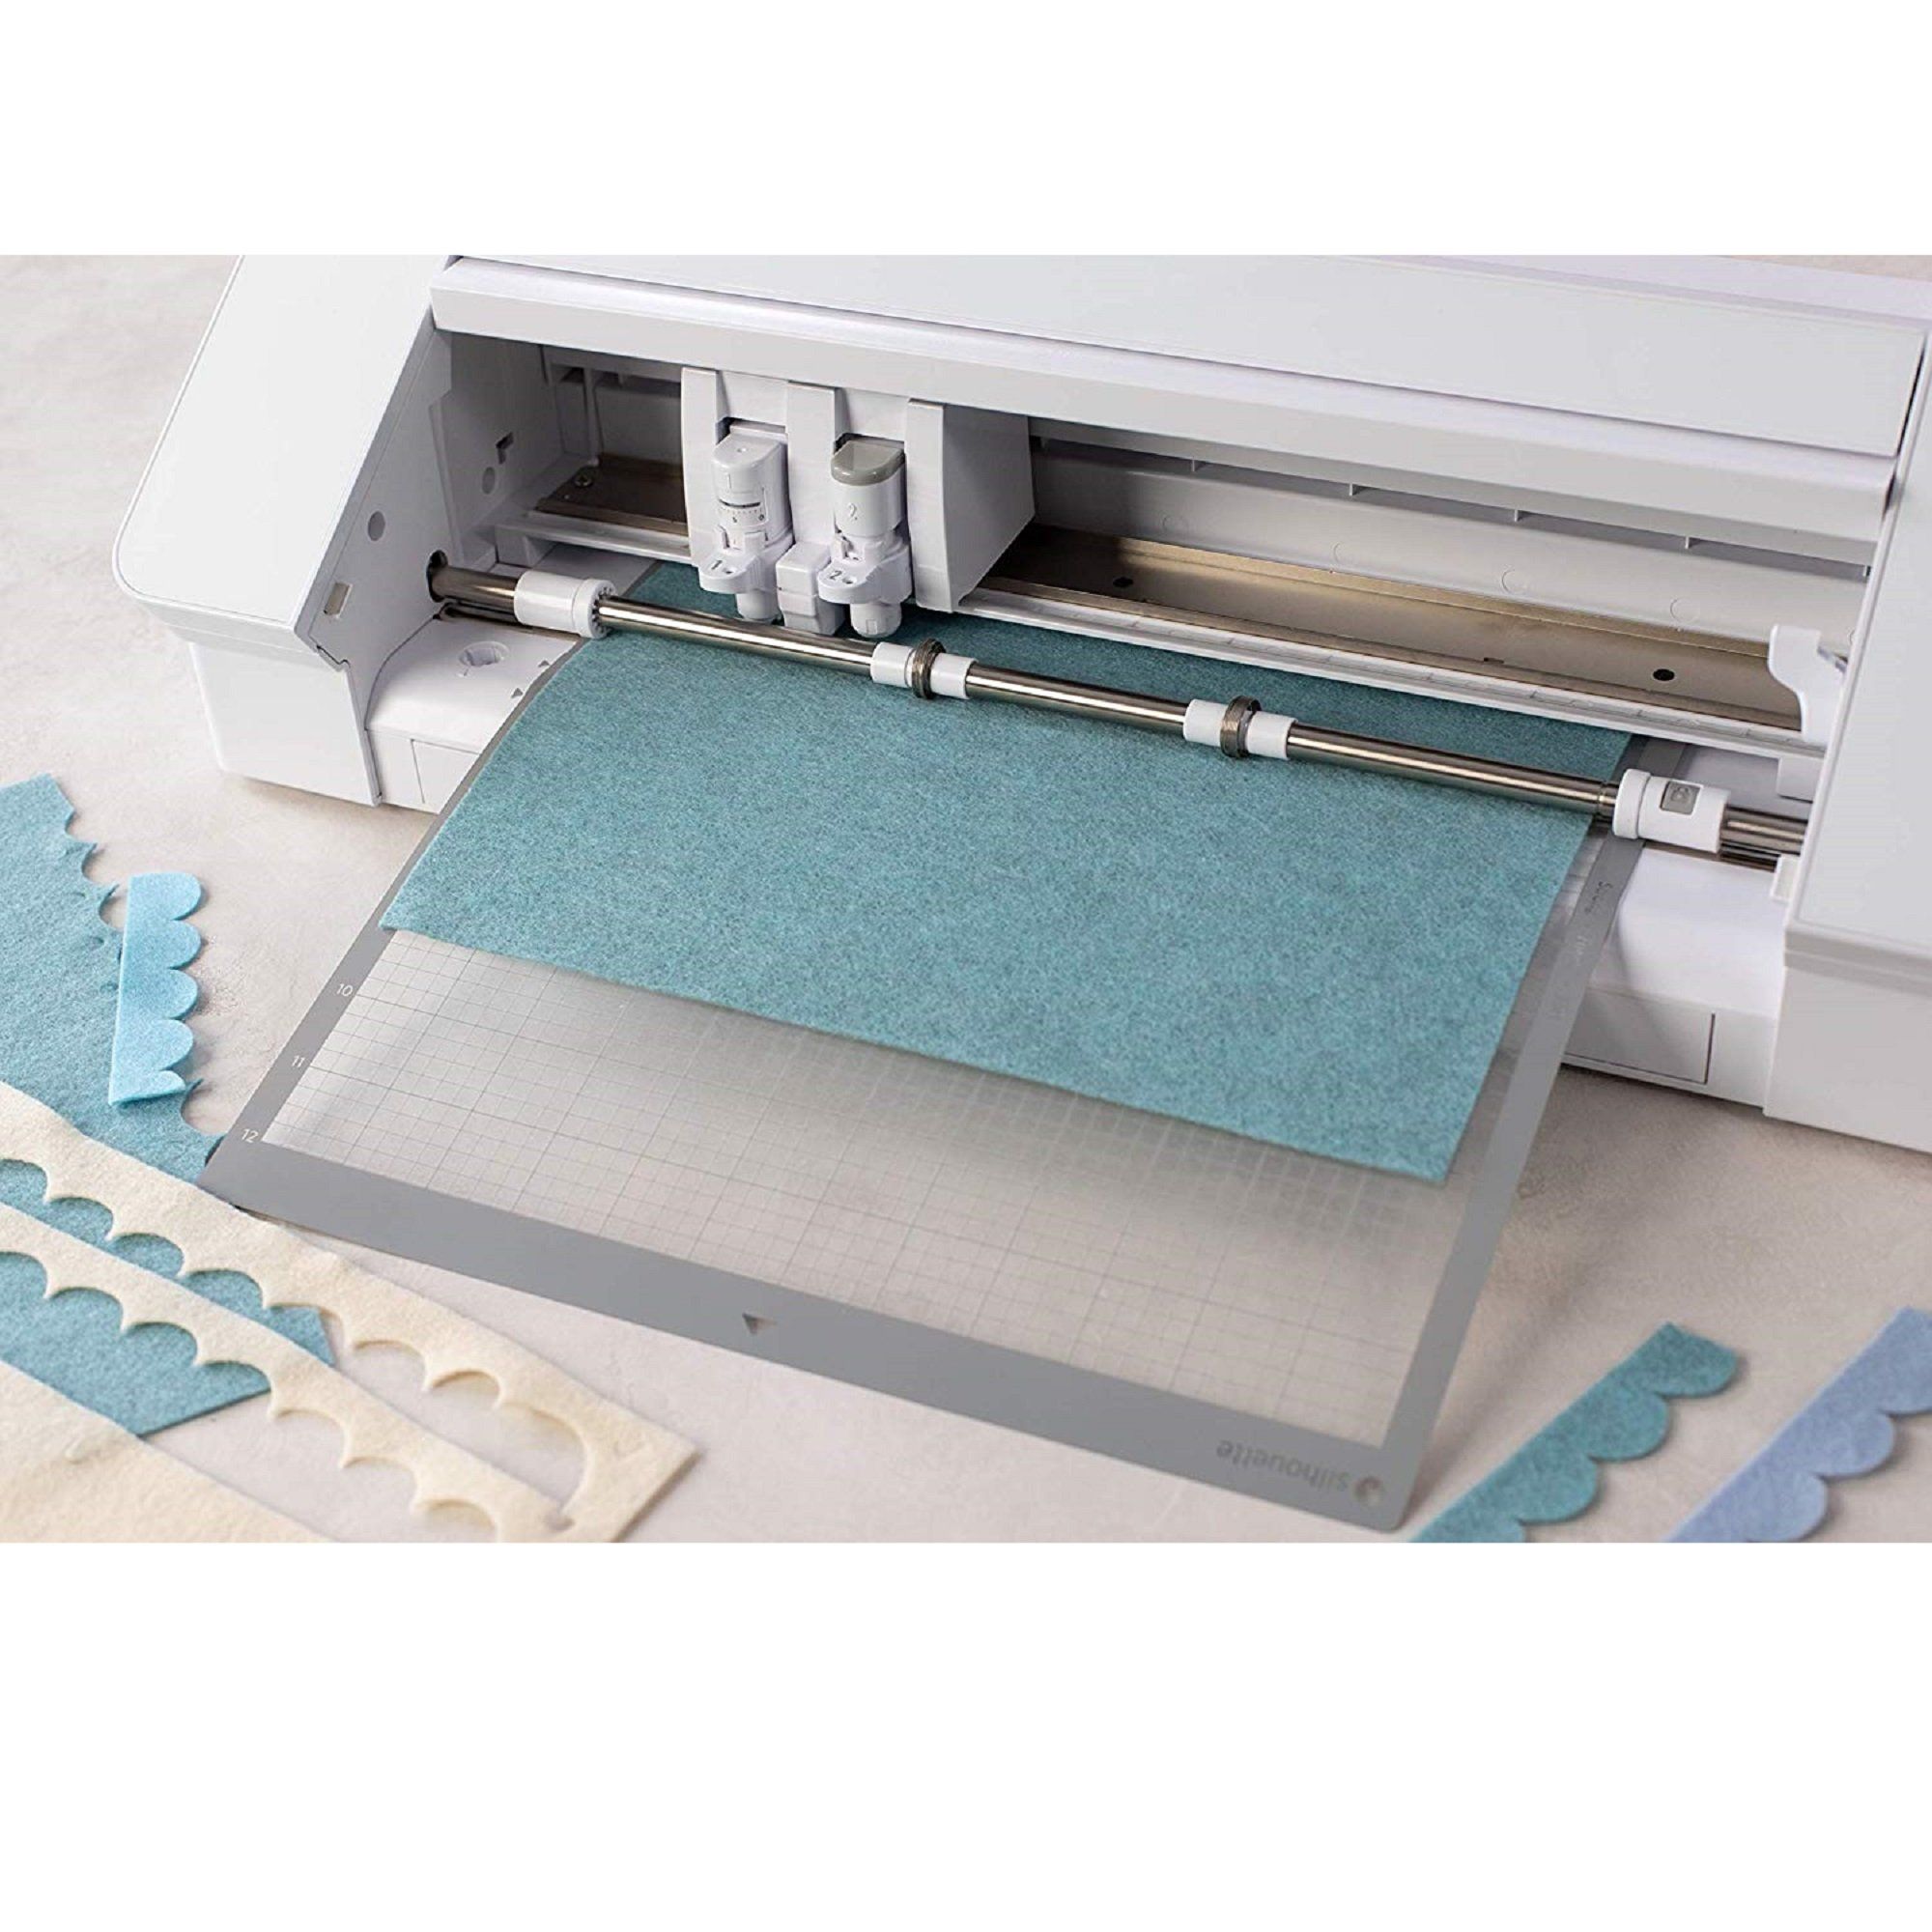 Silhouette Cameo Cutting Mat 12 In. X 12 In., Sewing